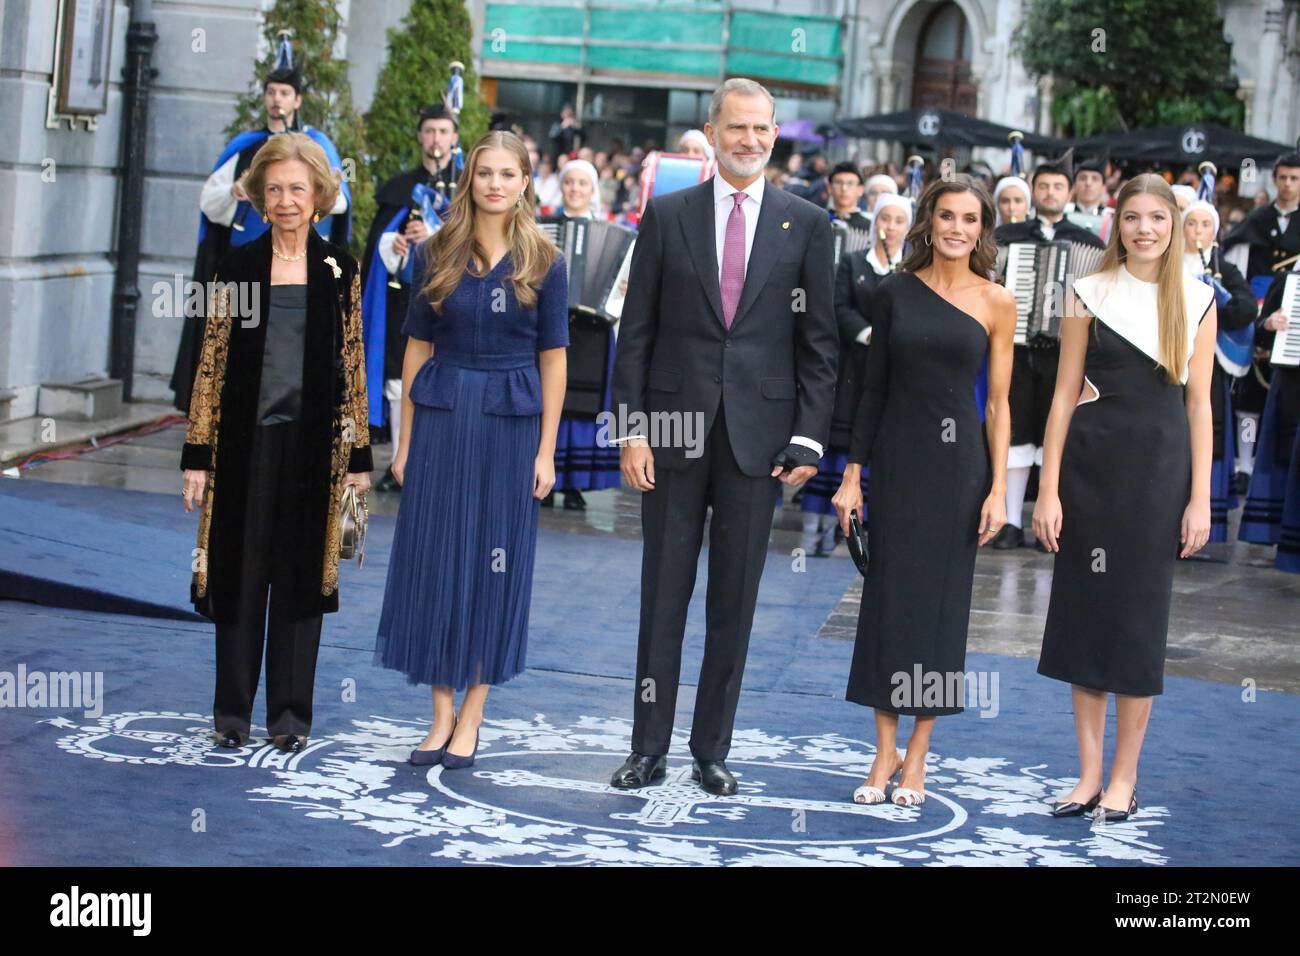 Oviedo, Asturias, October 20, 2023: The Kings of Spain pose with Queen Sofia (L) and her two daughters, the Princess of Asturias, Leonor de Borbon (2L) and the Infanta of Asturias, Sofia de Borbon (R) during the Blue Carpet of the 2023 Princess Awards, on October 20, 2023, in Oviedo, Spain. Credit: Alberto Brevers / Alamy Live News. Stock Photo